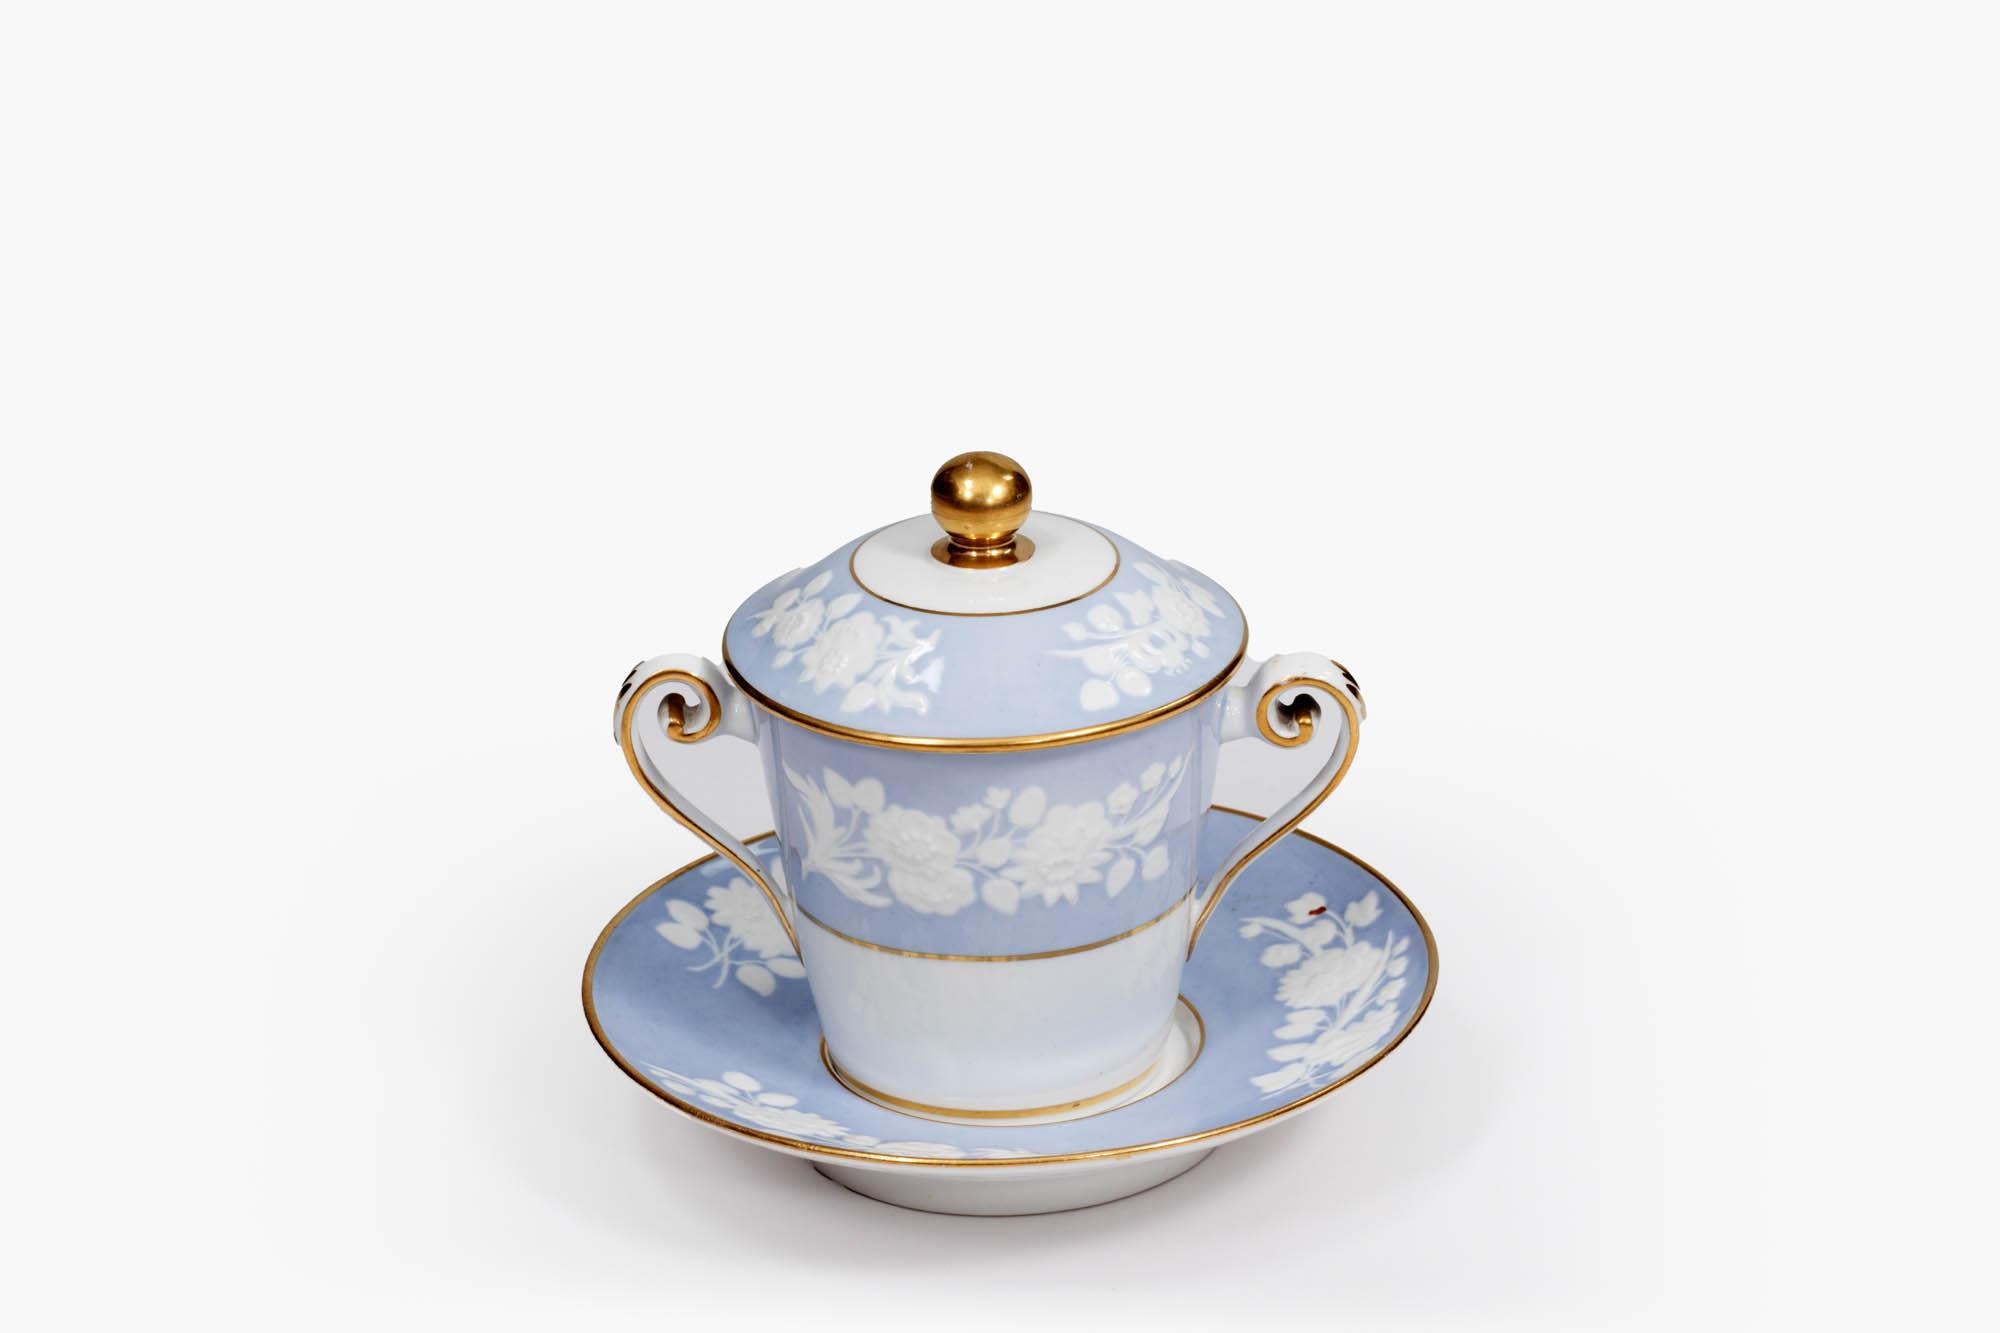 19th century late Georgian blue spode hot chocolate cup with cover and saucer, decorated with gilt highlights, and embossed white floral motif on a pale blue background. circa 1800.